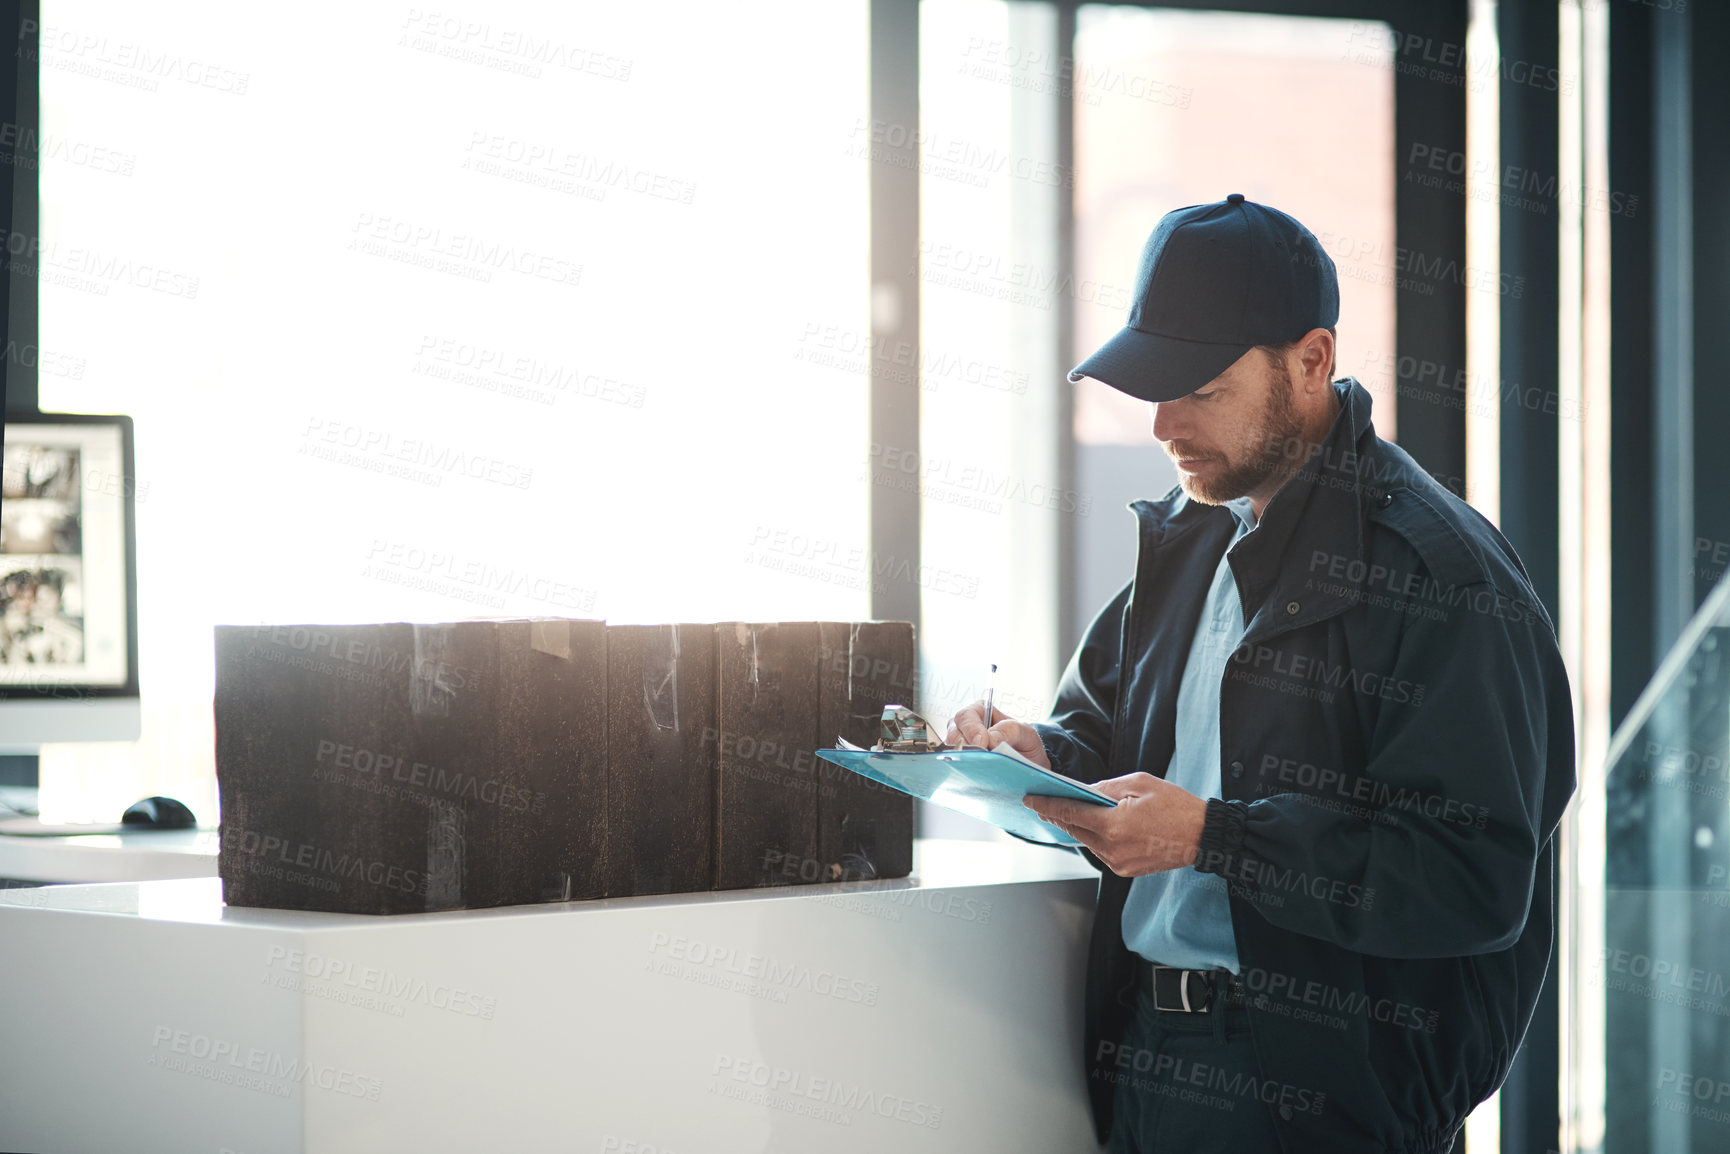 Buy stock photo Shot of a handsome delivery man writing on his clipboard while waiting in the lobby with a customer's order